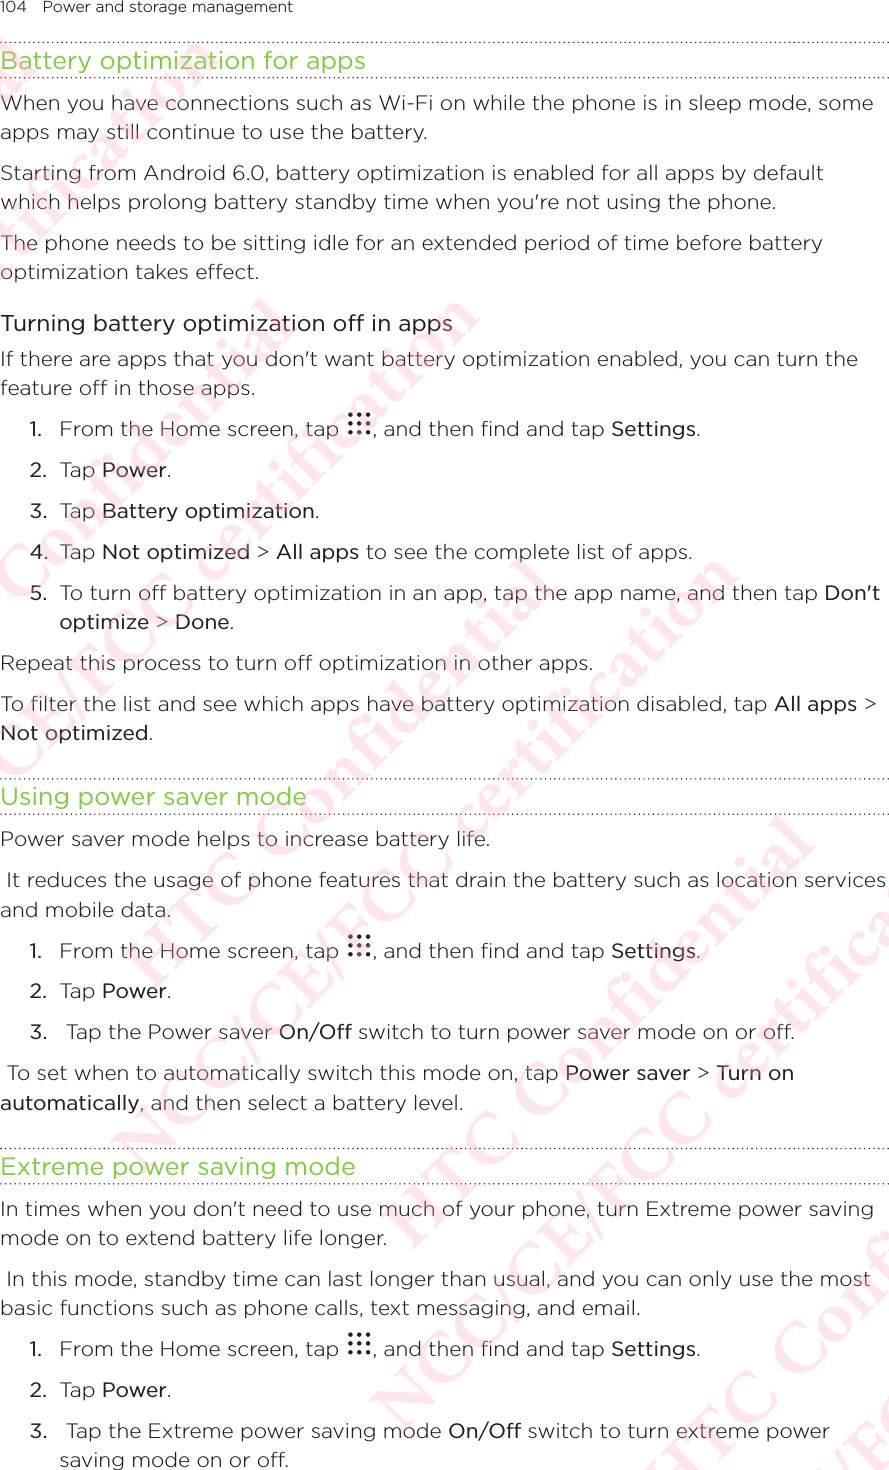 104 Power and storage managementBattery optimization for appsWhen you have connections such as Wi-Fi on while the phone is in sleep mode, some apps may still continue to use the battery. Starting from Android 6.0, battery optimization is enabled for all apps by default which helps prolong battery standby time when you&apos;re not using the phone. The phone needs to be sitting idle for an extended period of time before battery optimization takes effect. Turning battery optimization off in appsIf there are apps that you don&apos;t want battery optimization enabled, you can turn the feature off in those apps. 1.  From the Home screen, tap  , and then find and tap Settings. 2.  Tap Power.3.  Tap Battery optimization. 4.  Tap Not optimized &gt; All apps to see the complete list of apps. 5.  To turn off battery optimization in an app, tap the app name, and then tap Don&apos;t optimize &gt; Done. Repeat this process to turn off optimization in other apps. To filter the list and see which apps have battery optimization disabled, tap All apps &gt; Not optimized.Using power saver modePower saver mode helps to increase battery life.  It reduces the usage of phone features that drain the battery such as location services and mobile data. 1.  From the Home screen, tap  , and then find and tap Settings. 2.  Tap Power.3.   Tap the Power saver On/Off switch to turn power saver mode on or off.  To set when to automatically switch this mode on, tap Power saver &gt; Turn on automatically, and then select a battery level. Extreme power saving modeIn times when you don&apos;t need to use much of your phone, turn Extreme power saving mode on to extend battery life longer.  In this mode, standby time can last longer than usual, and you can only use the most basic functions such as phone calls, text messaging, and email. 1.  From the Home screen, tap  , and then find and tap Settings. 2.  Tap Power.3.   Tap the Extreme power saving mode On/Off switch to turn extreme power saving mode on or off. HTC Confidential NCC/CE/FCC certification  HTC Confidential NCC/CE/FCC certification  HTC Confidential NCC/CE/FCC certification  HTC Confidential NCC/CE/FCC certification  HTC Confidential NCC/CE/FCC certification